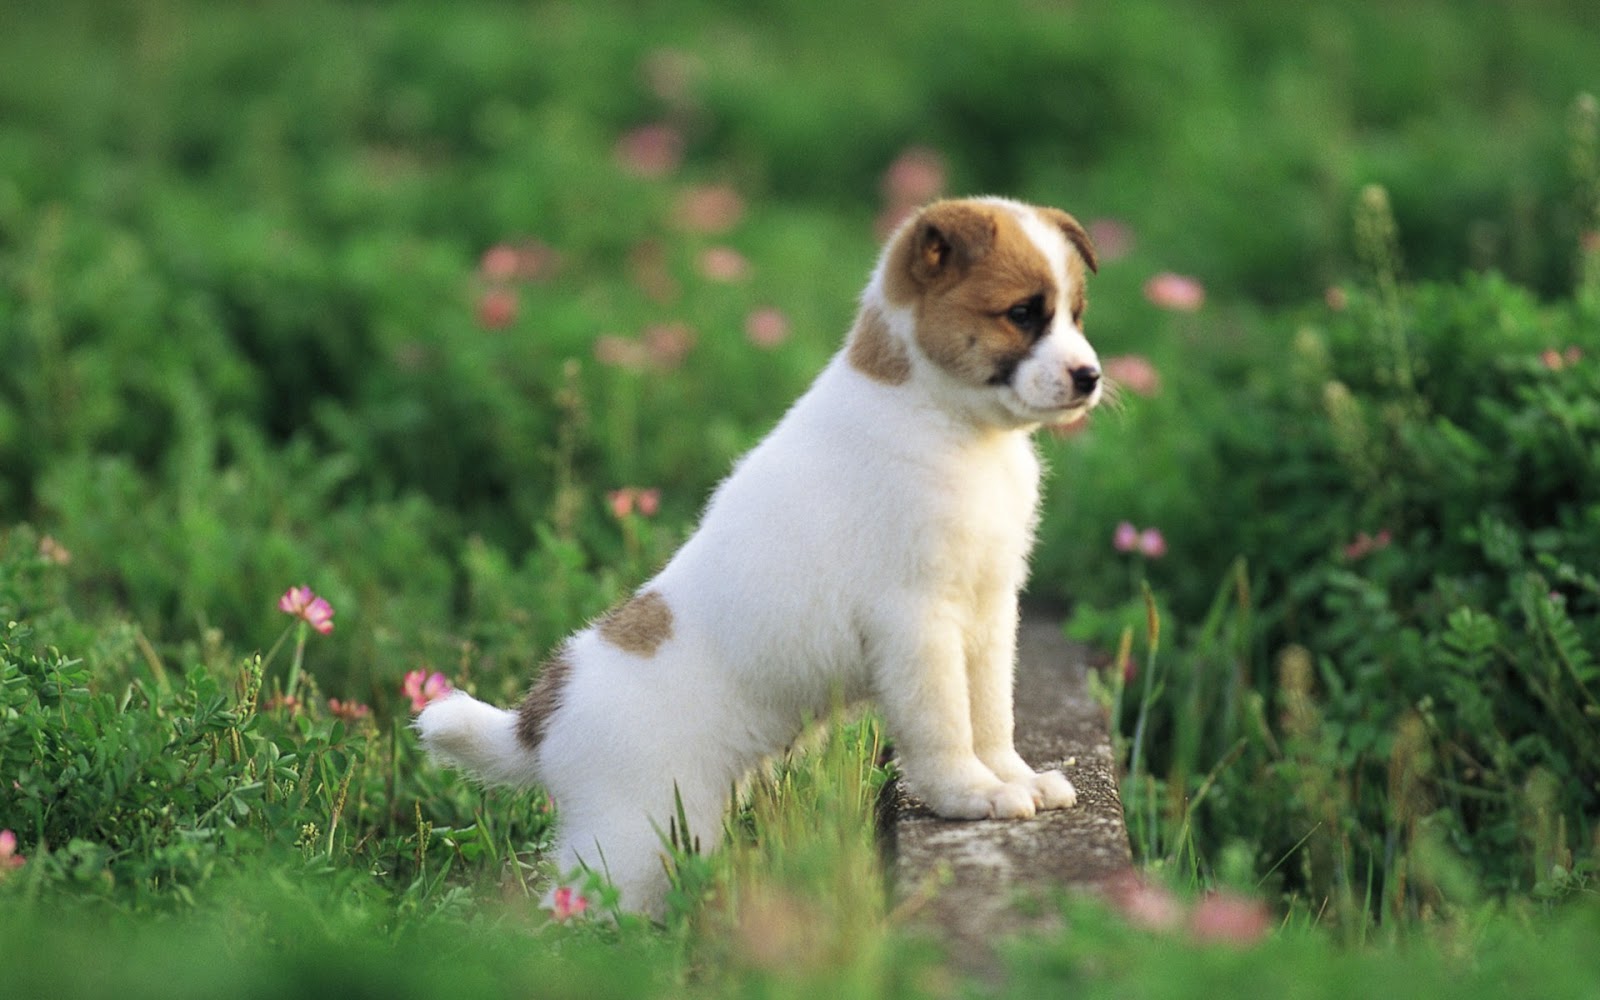  cute  dog  baby dog  hd wallpapers  free download  1080p 